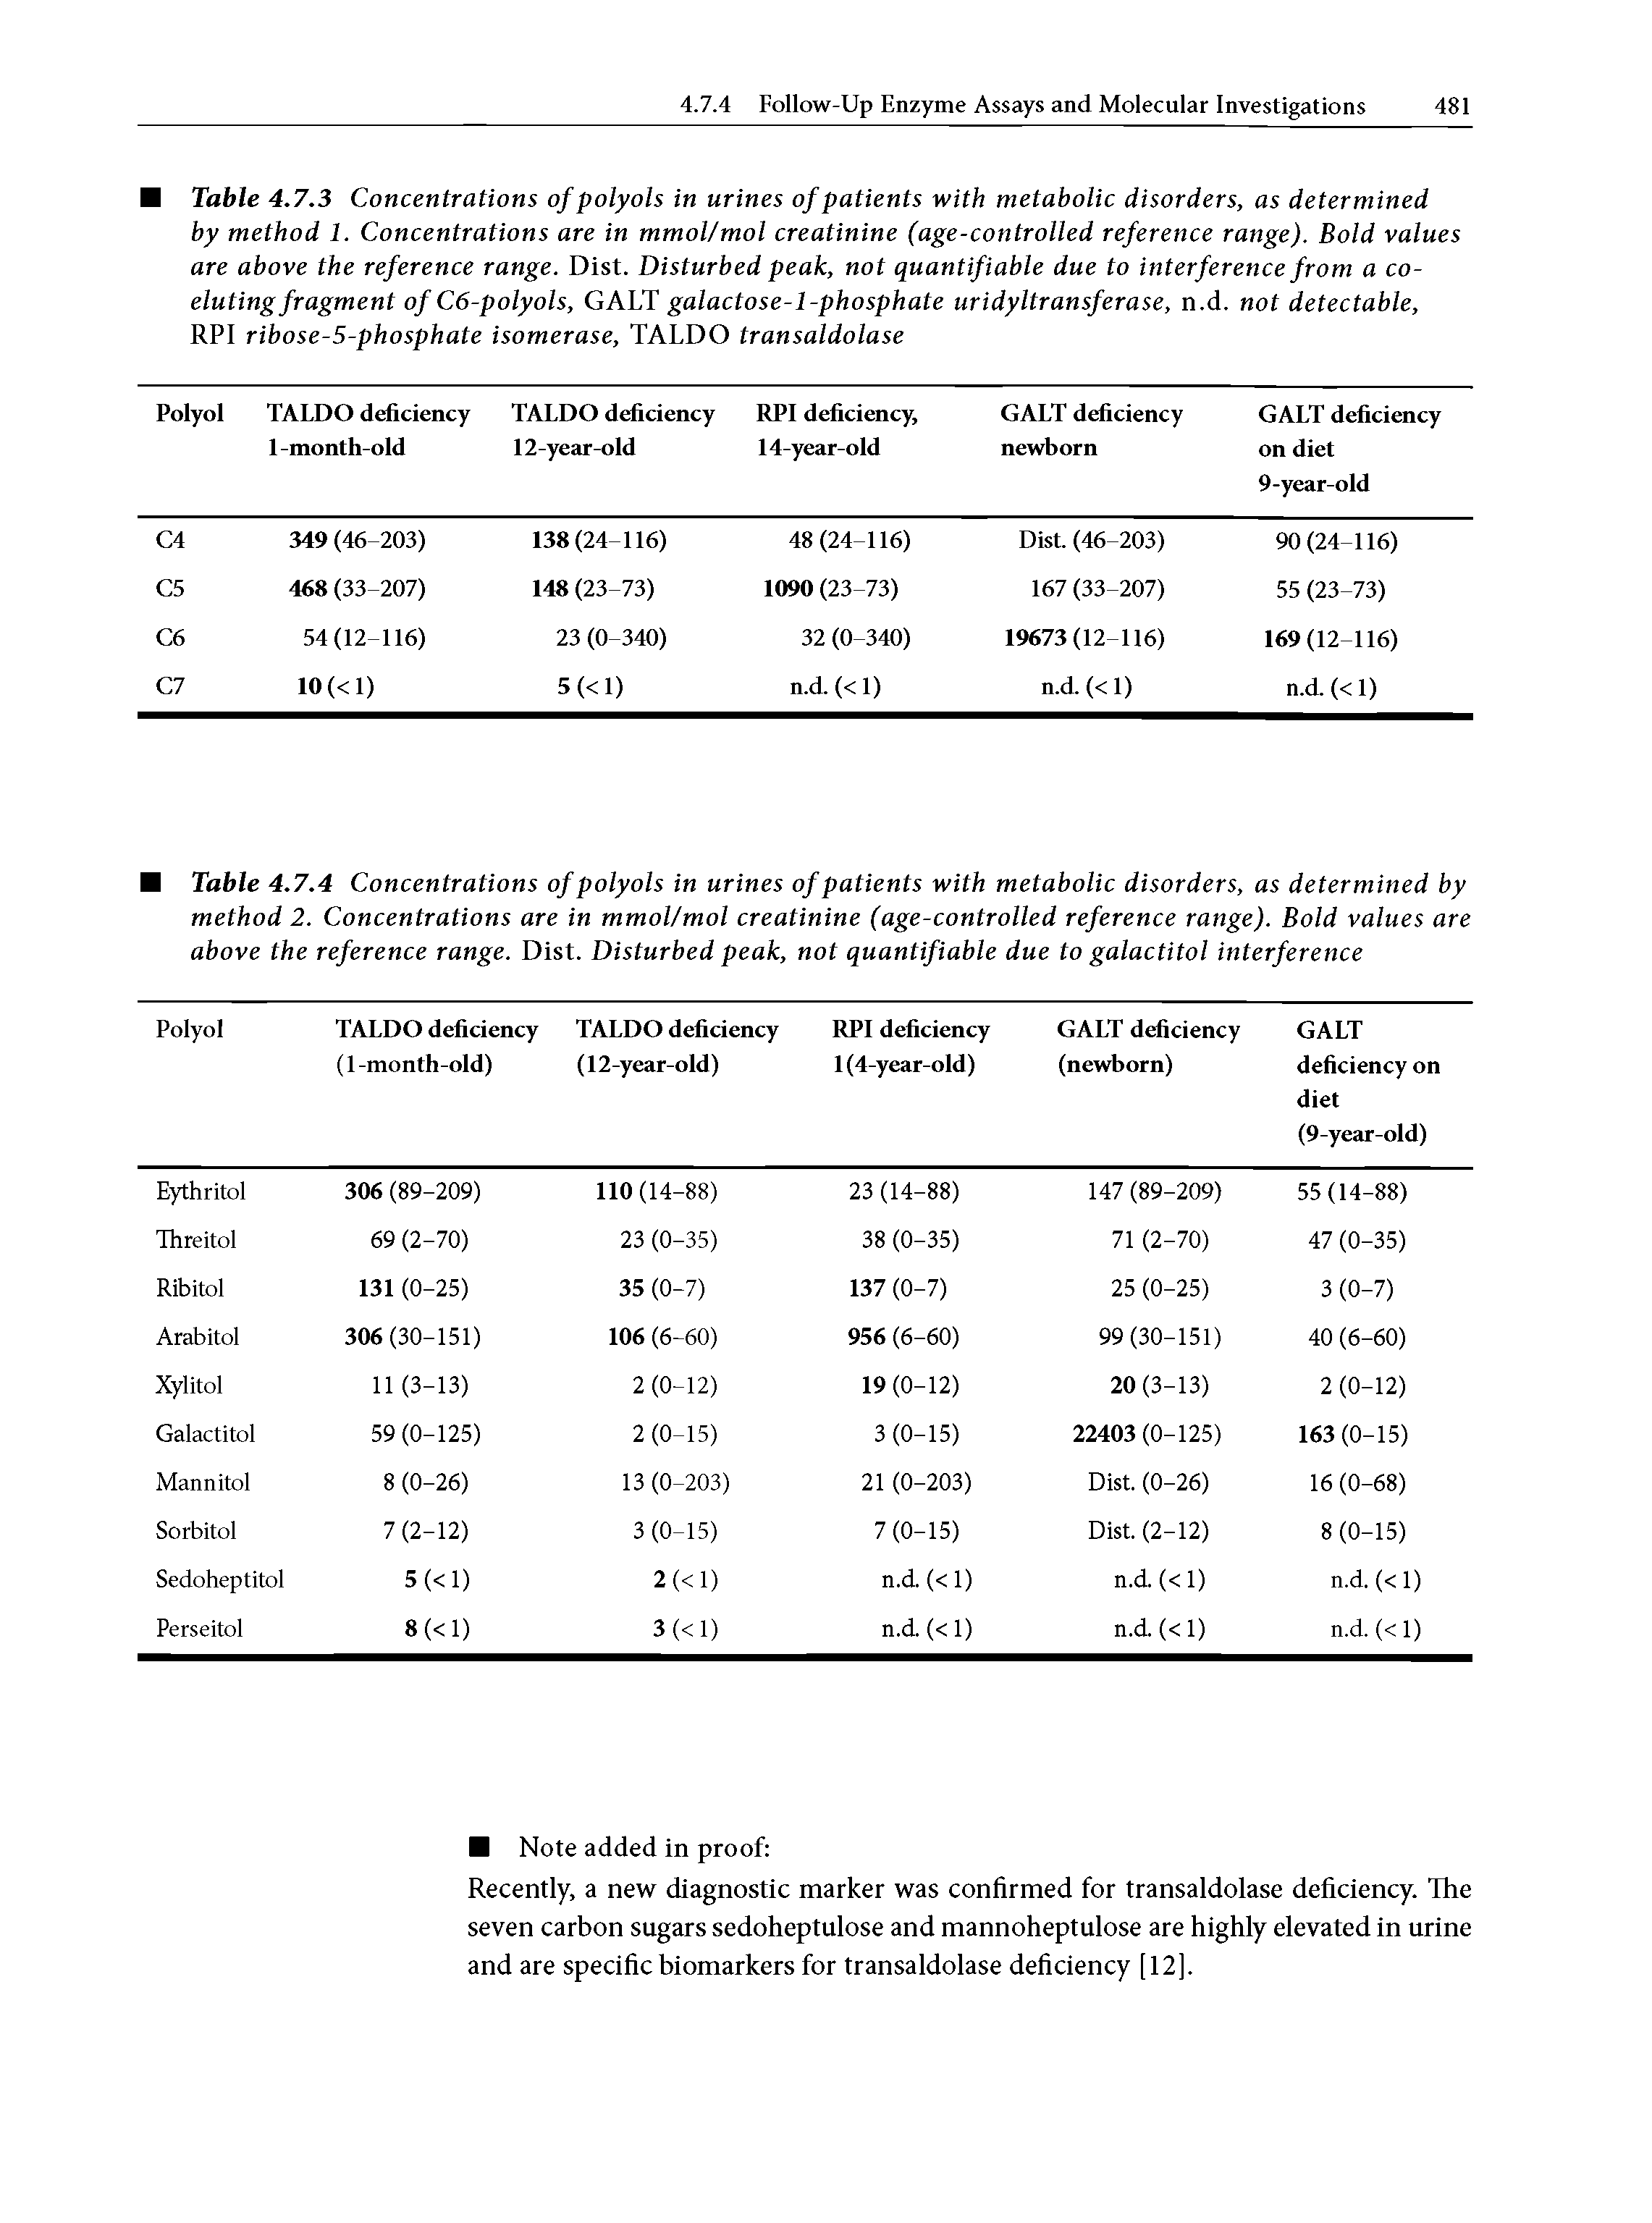 Table 4.7.3 Concentrations of polyols in urines of patients with metabolic disorders, as determined by method 1. Concentrations are in mmol/mol creatinine (age-controlled reference range). Bold values are above the reference range. Dist. Disturbed peak, not quantifiable due to interference from a coeluting fragment of C6-polyols, GALT galactose-1-phosphate uridyltransferase, n.d. not detectable, RPI ribose-5-phosphate isomerase, TALDO transaldolase...